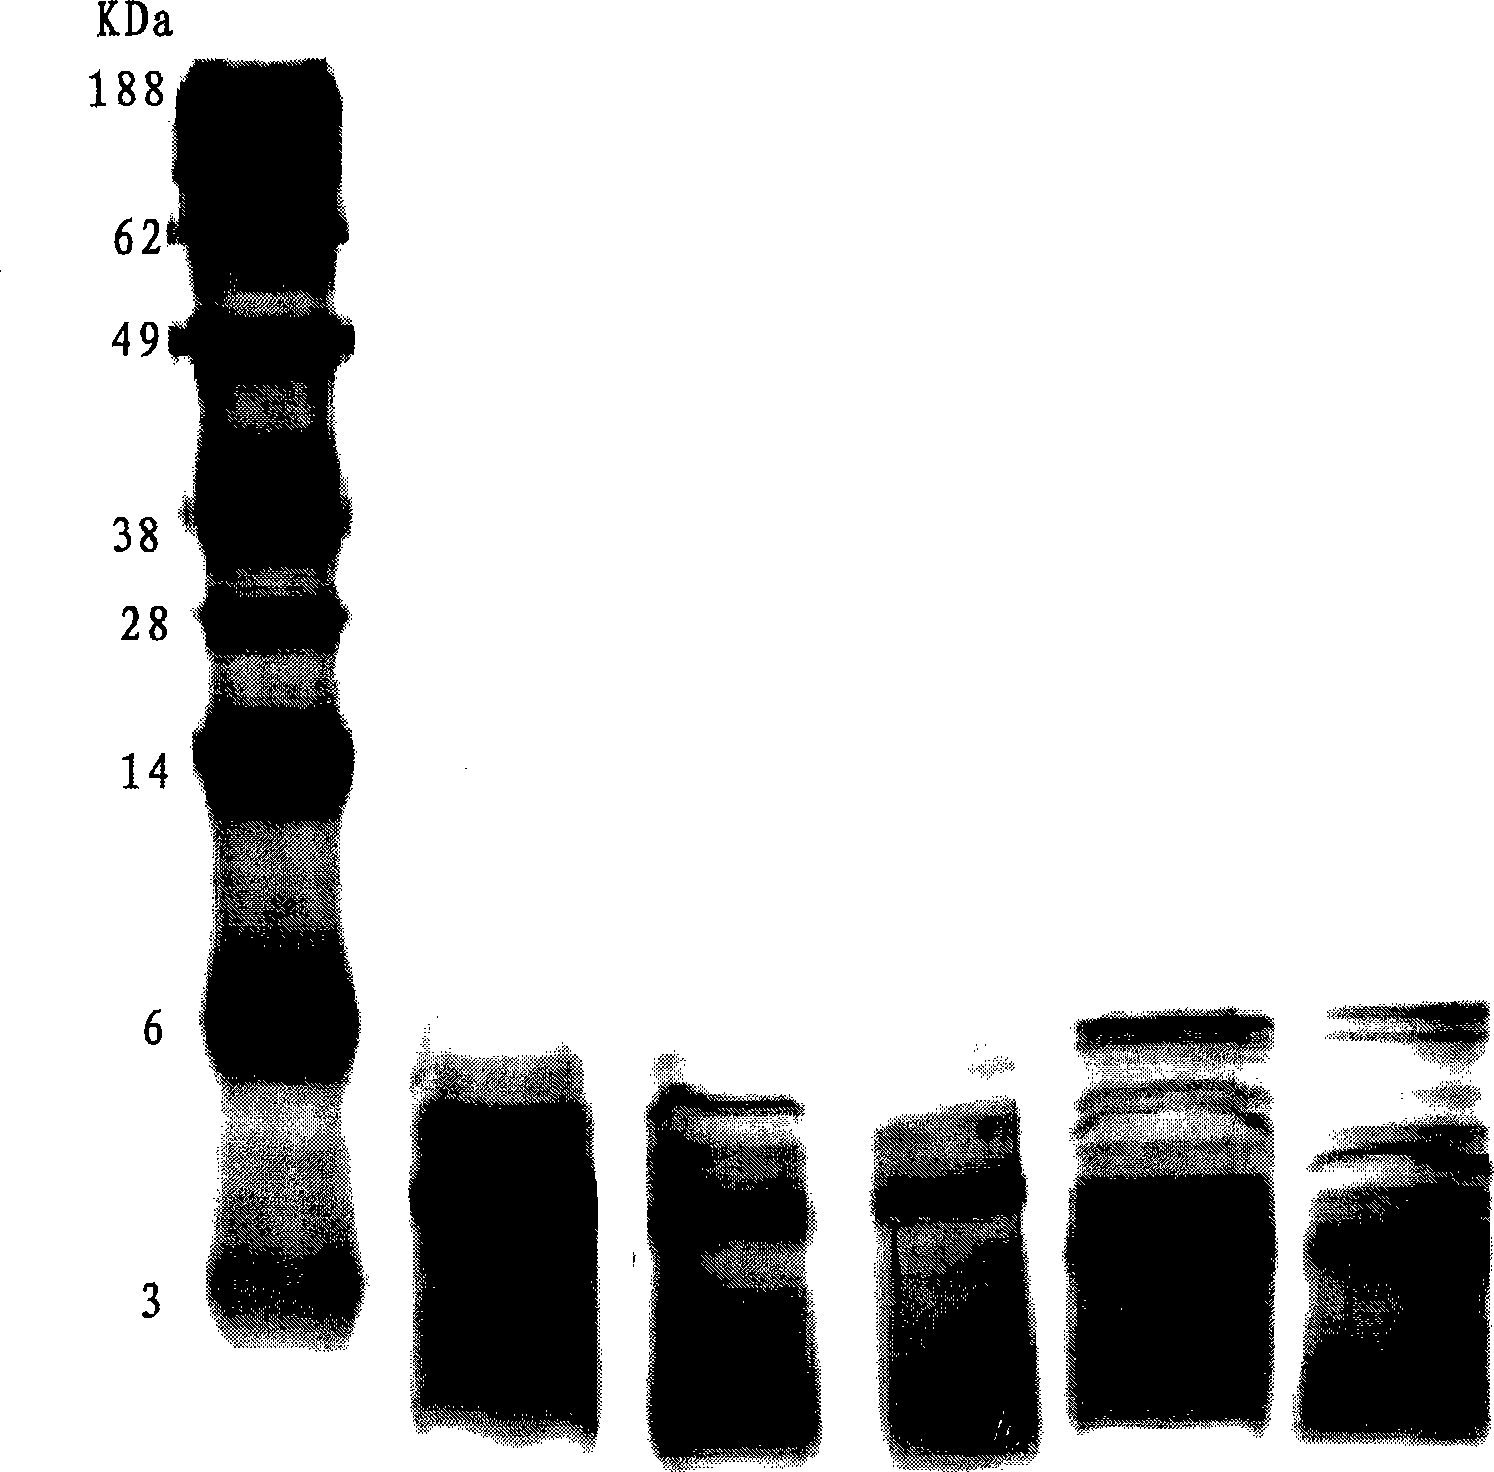 Composite for treating cancer containing oligonucleotide and nontoxic LPS